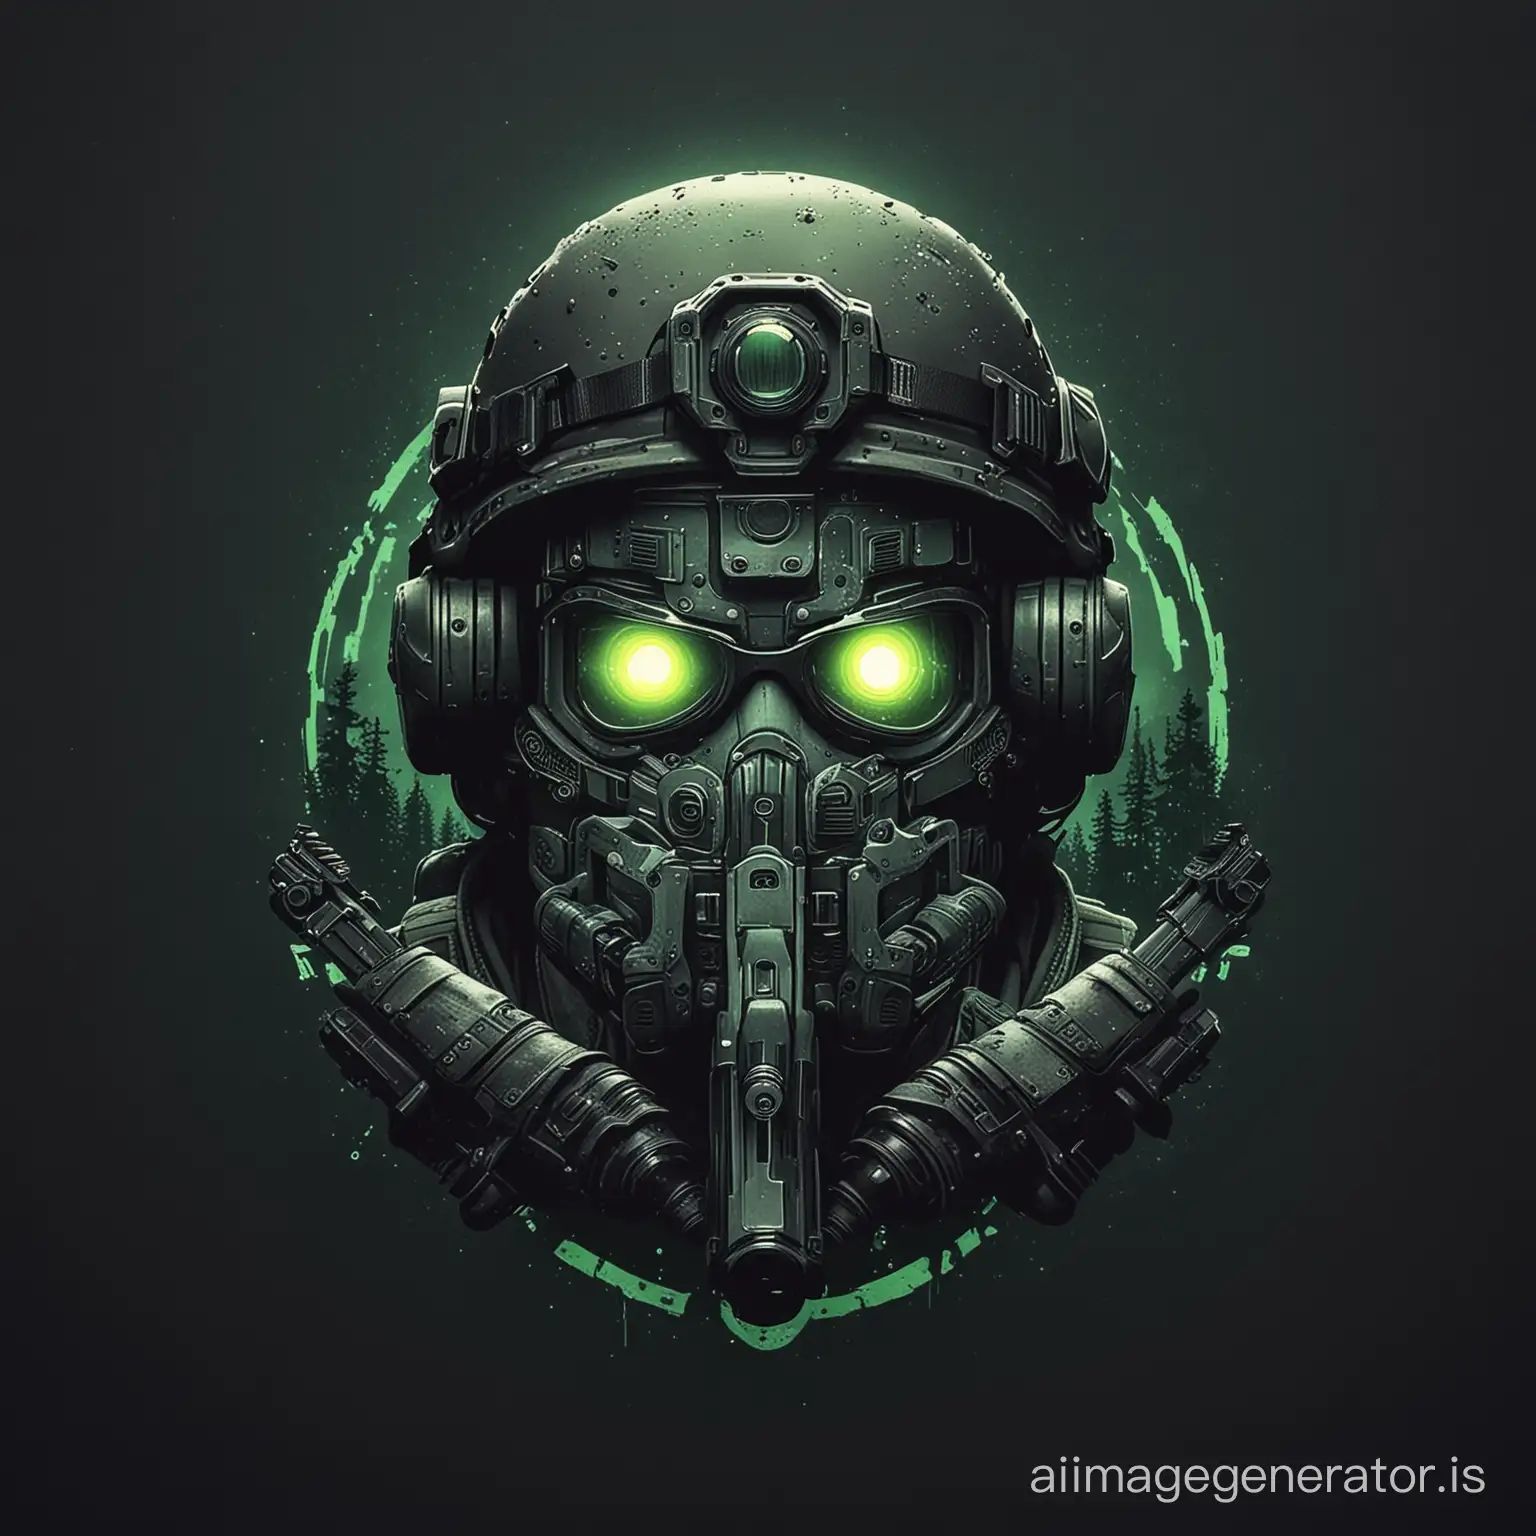 create a logo with gun and night vision helmet image